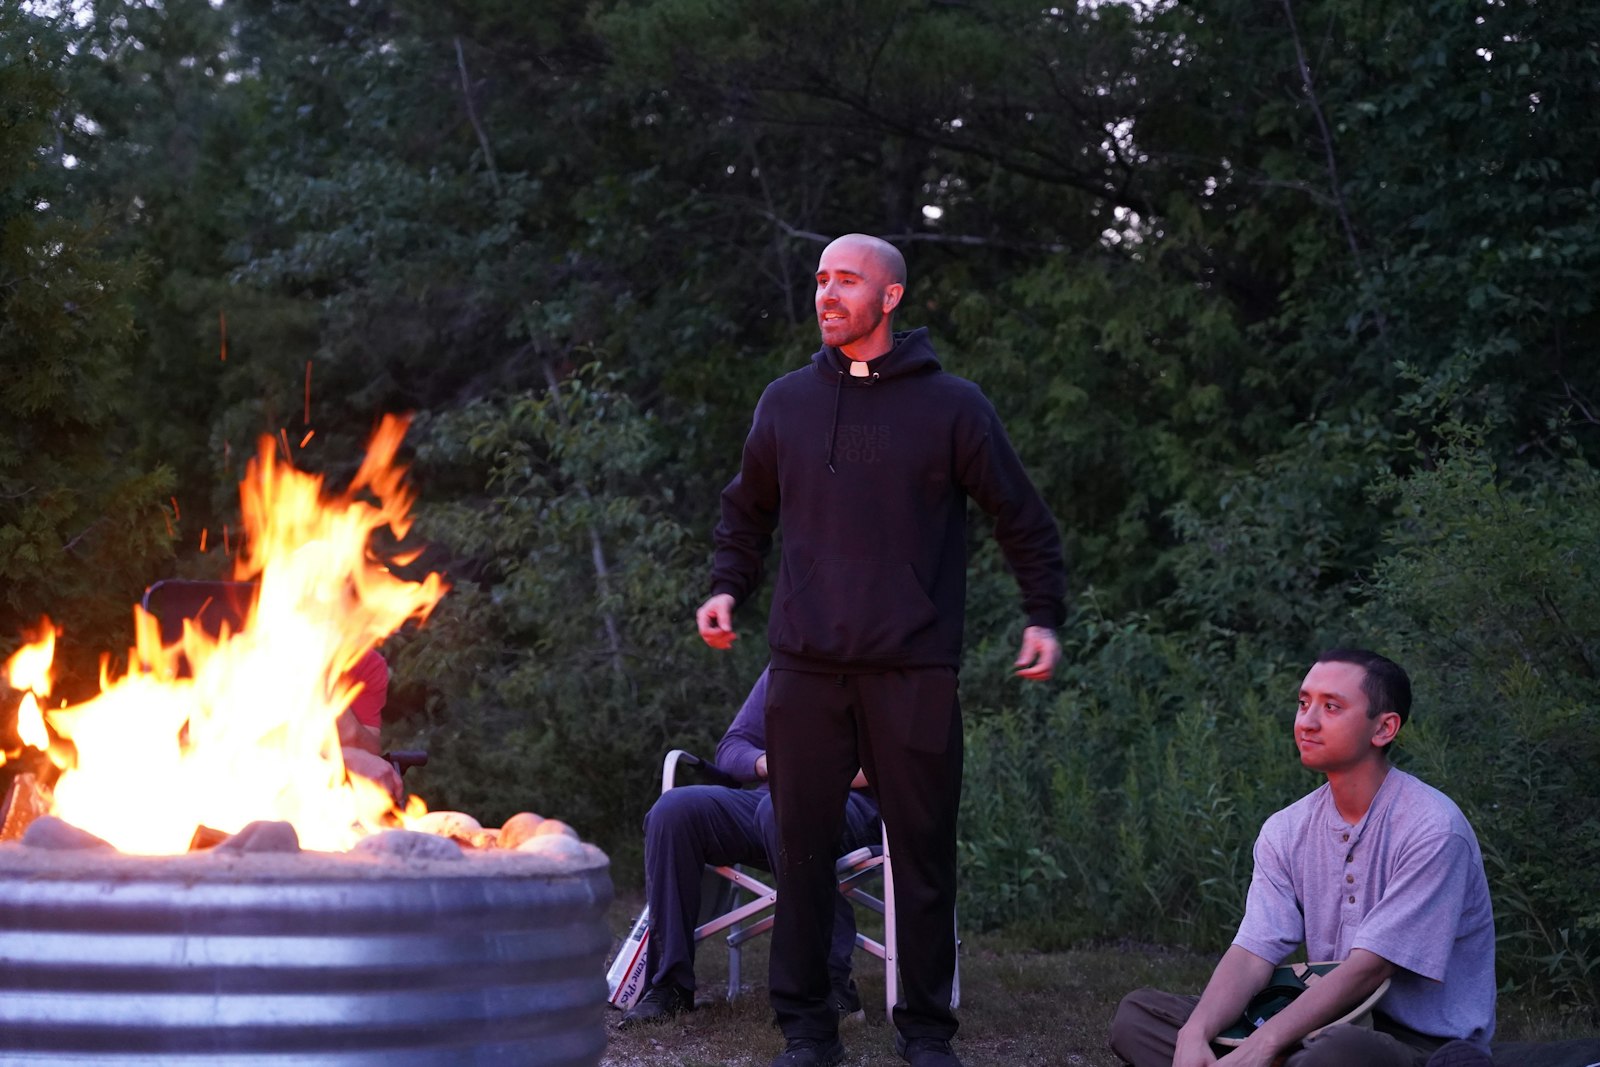 Fr. Adam Maher delivers a sermon by the bonfire on the first night of the retreat. Fr. Maher emphasized the hiking pilgrimage was not a vacation, and challenged the retreatants to discern what it is God was telling them during the weekend.